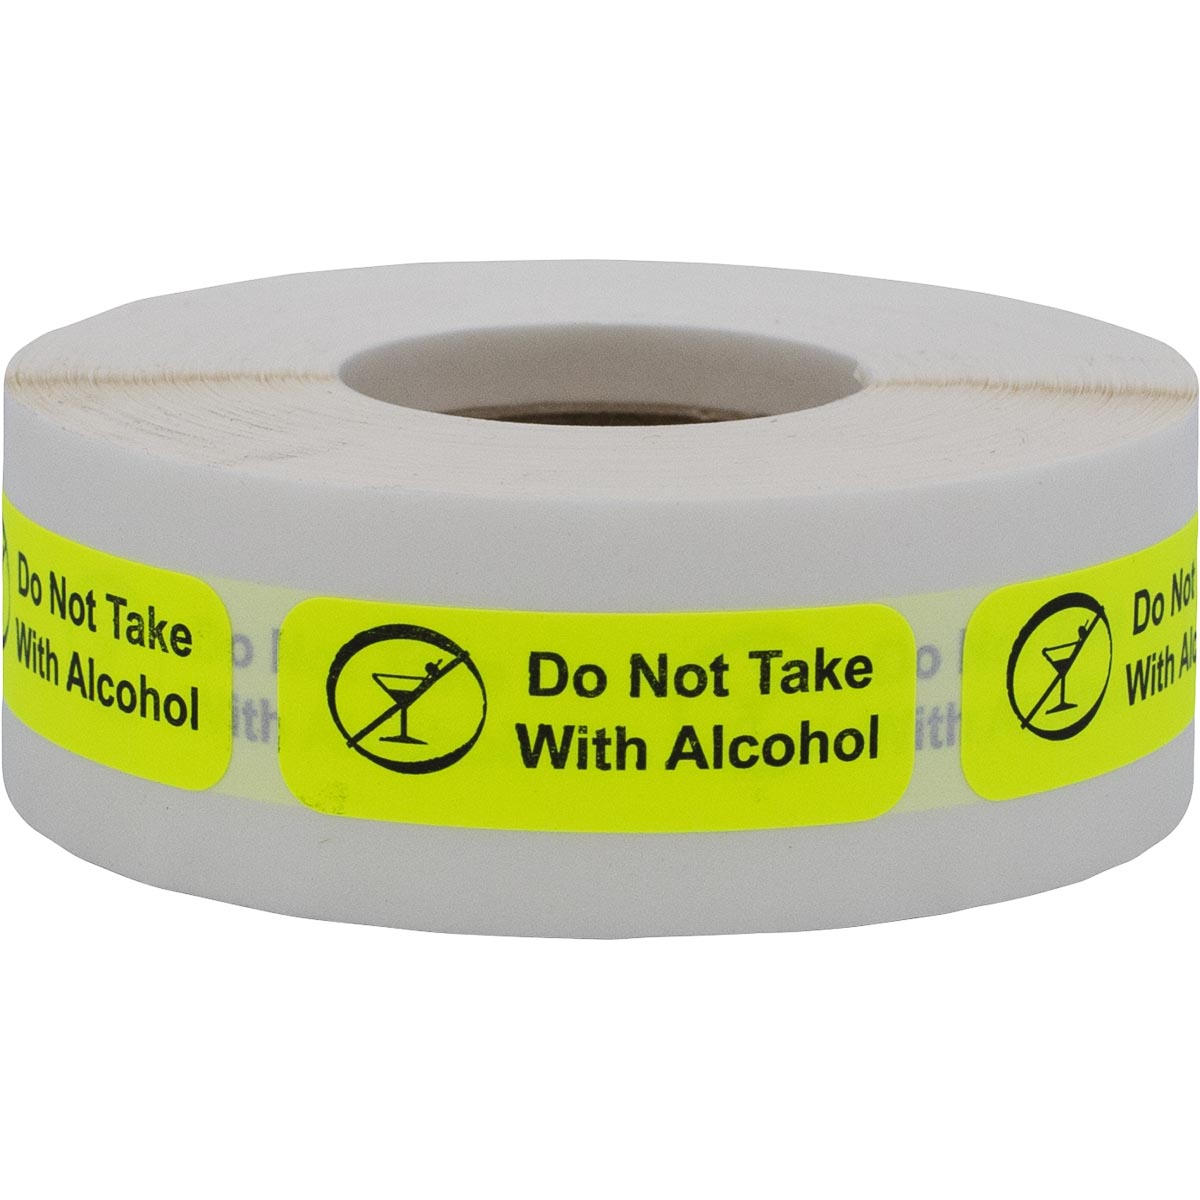 Do Not Take With Alcohol, Medical Warning Labels